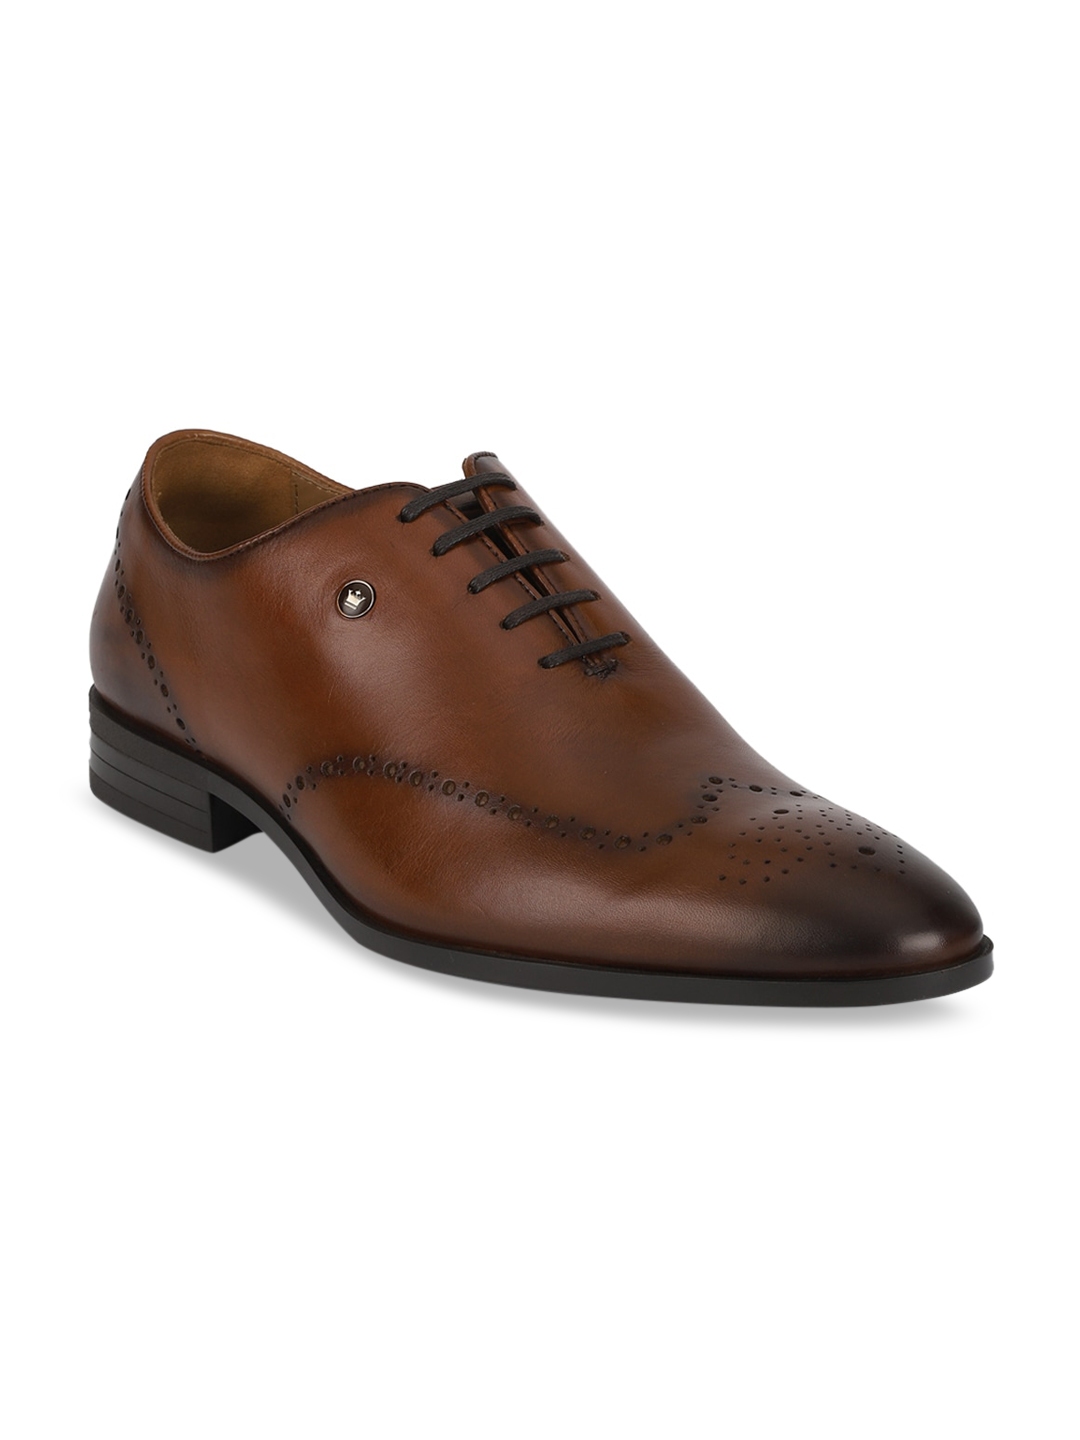 Louis Philippe Lace Ups : Buy Louis Philippe White Lace Up Shoes Online